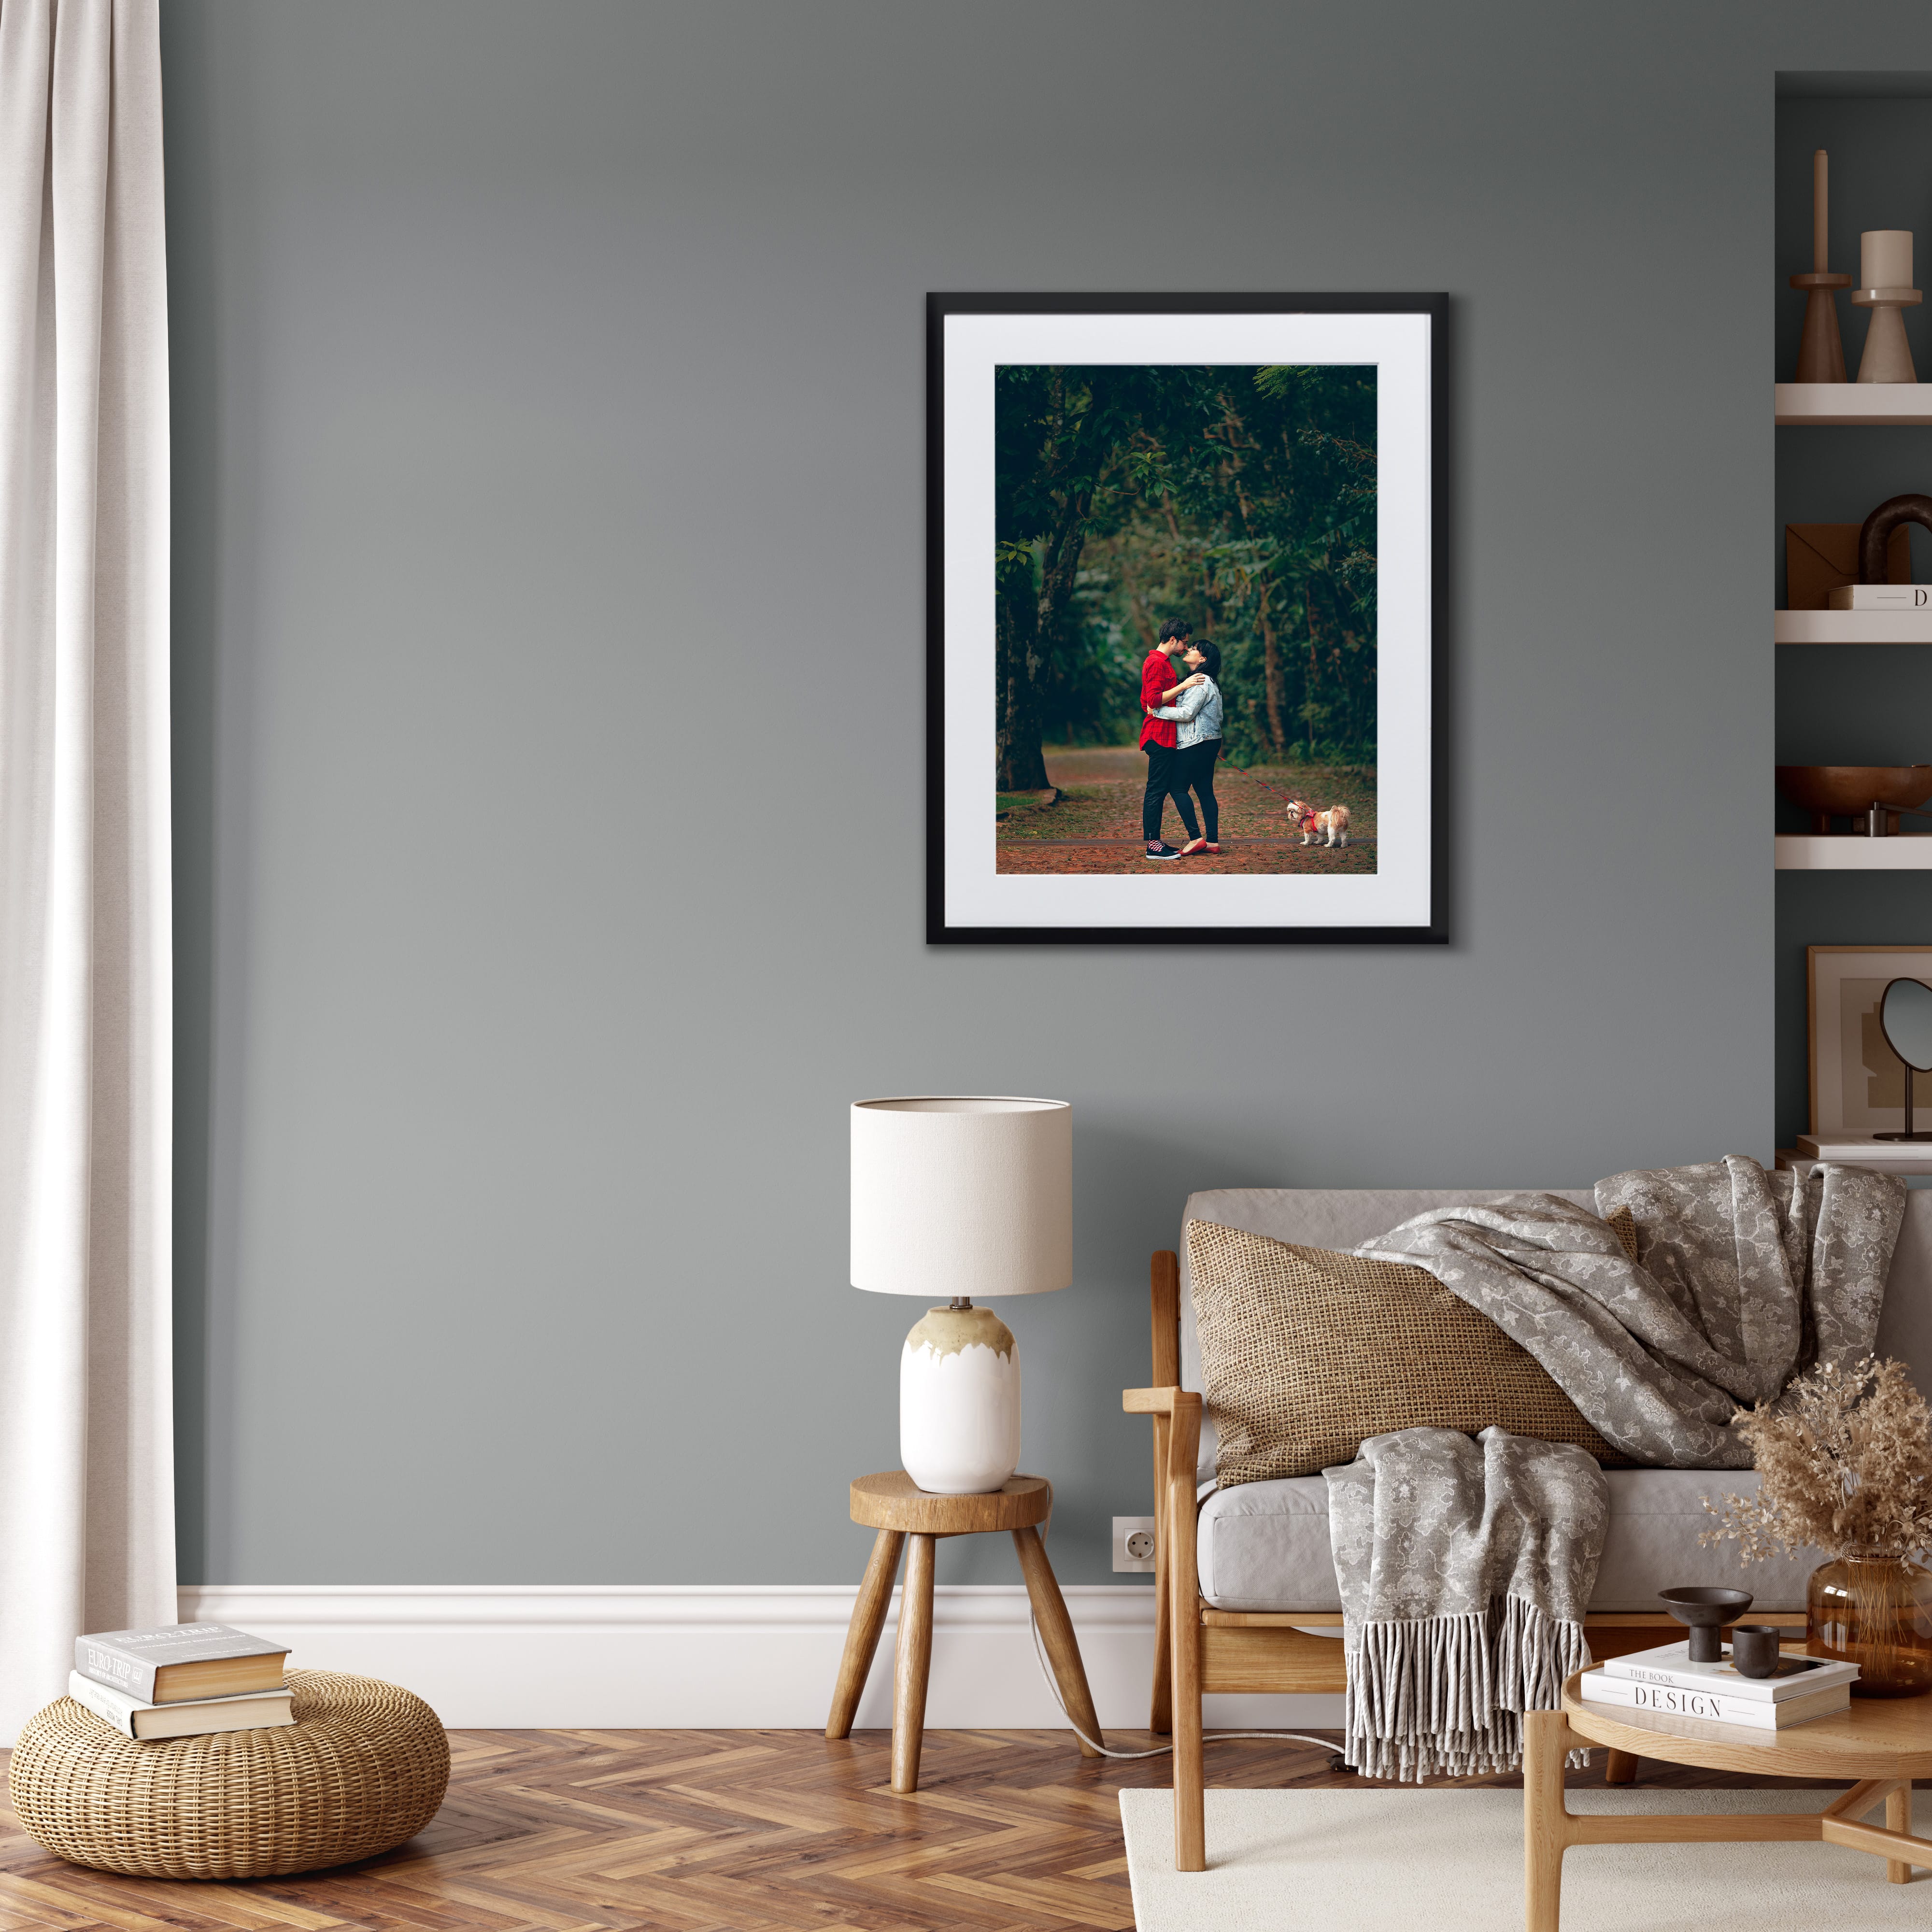 Framed print in living room of couple and their dog in the forrest